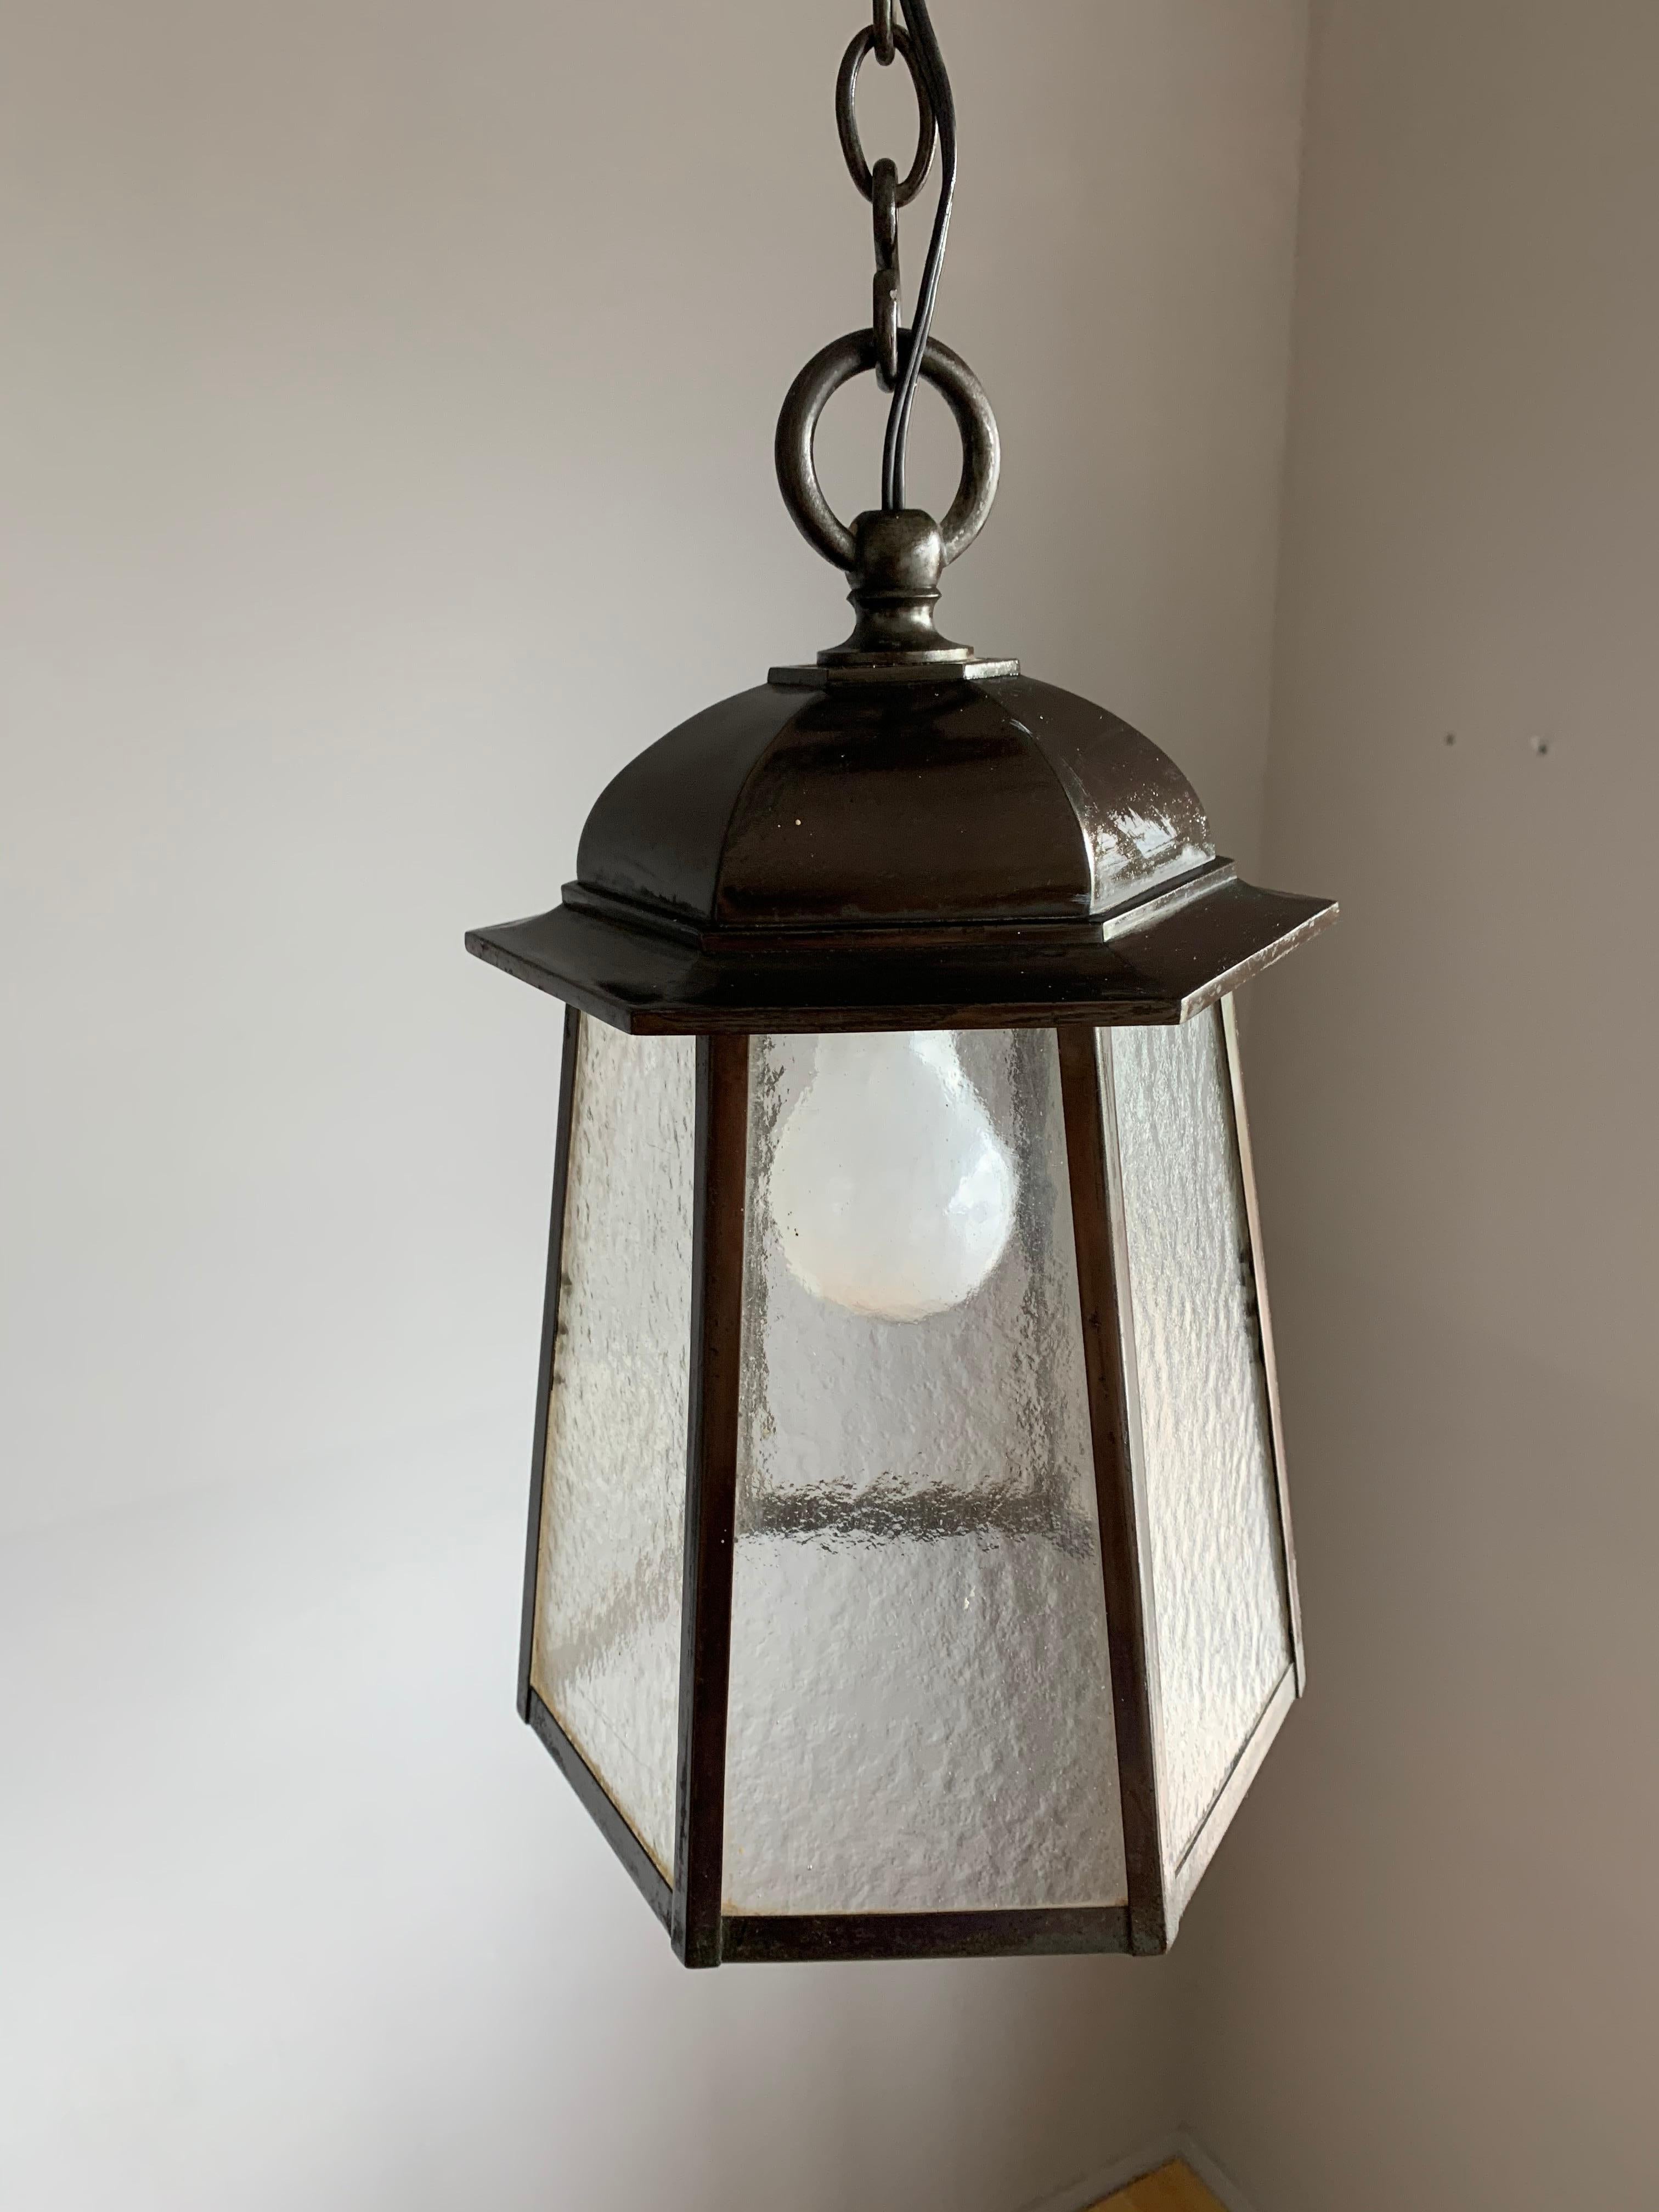 Unique and all handcrafted, hexagonal light fixture. 

If you are looking for a stylish and quality crafted light to grace your entry hall, landing or bedroom then this Arts & Crafts beauty could be perfect for you. It may sound strange, but this